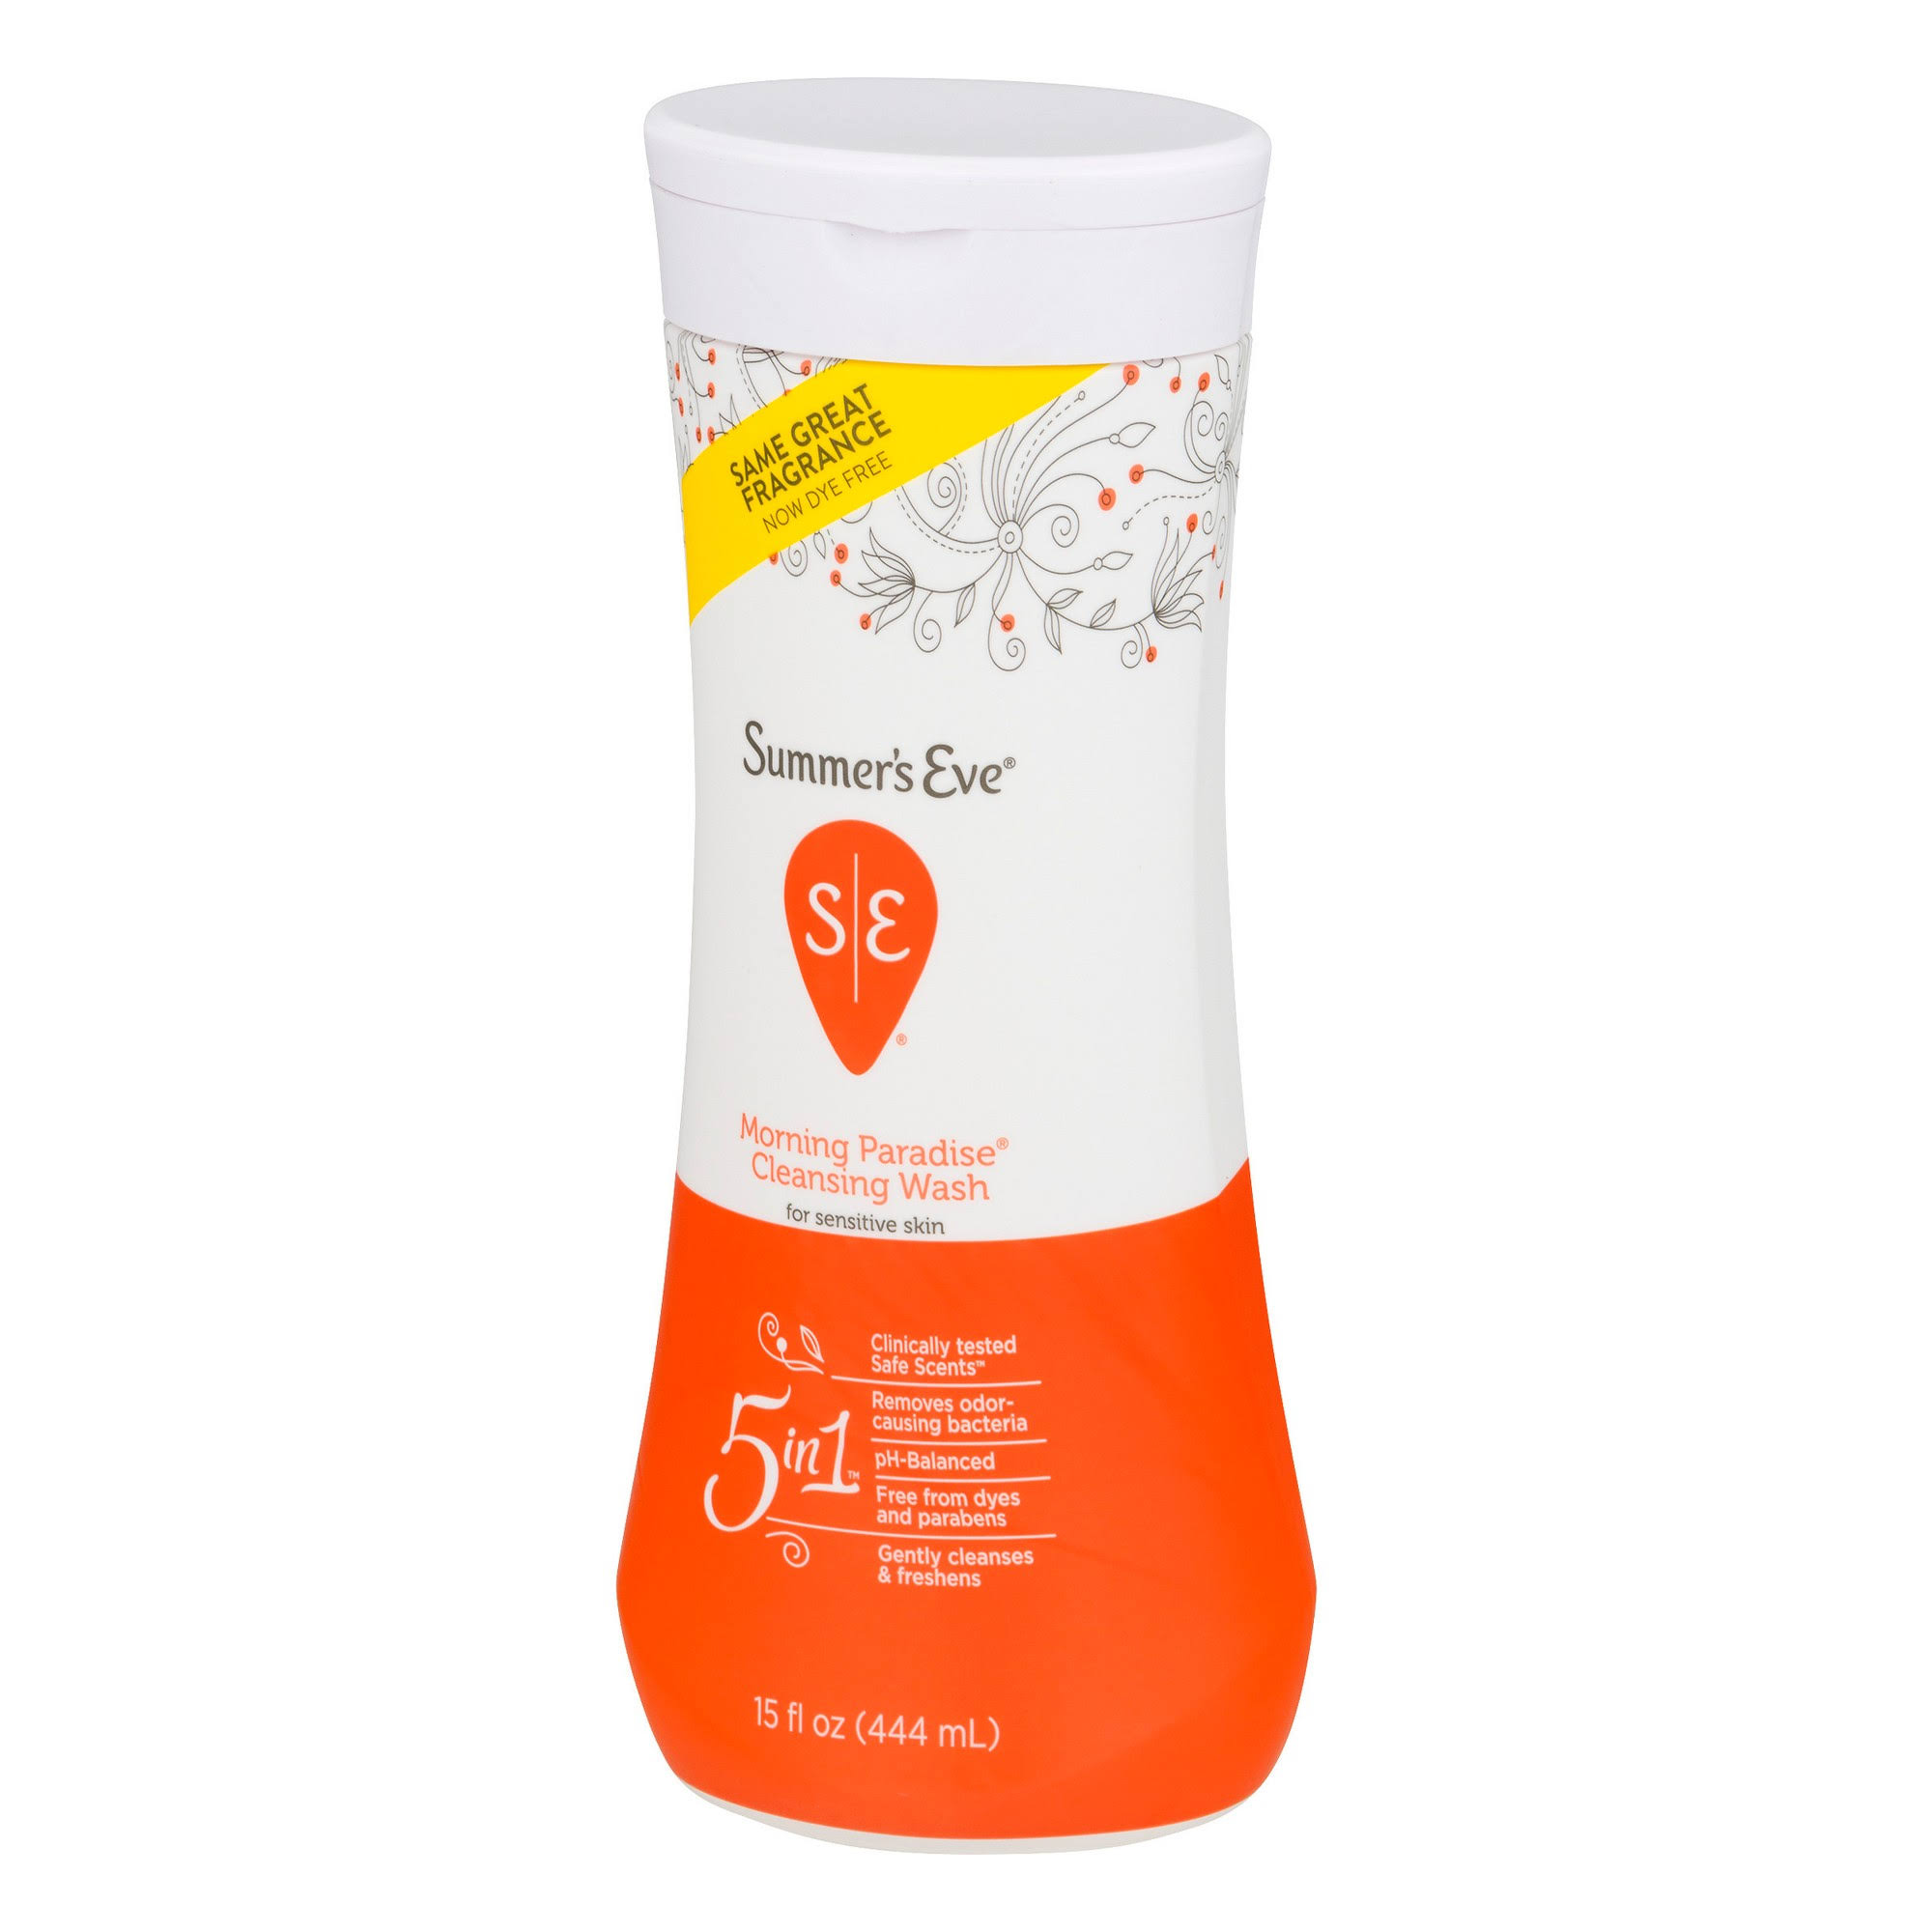 Summer's Eve Morning Paradise Cleansing Wash - 444ml